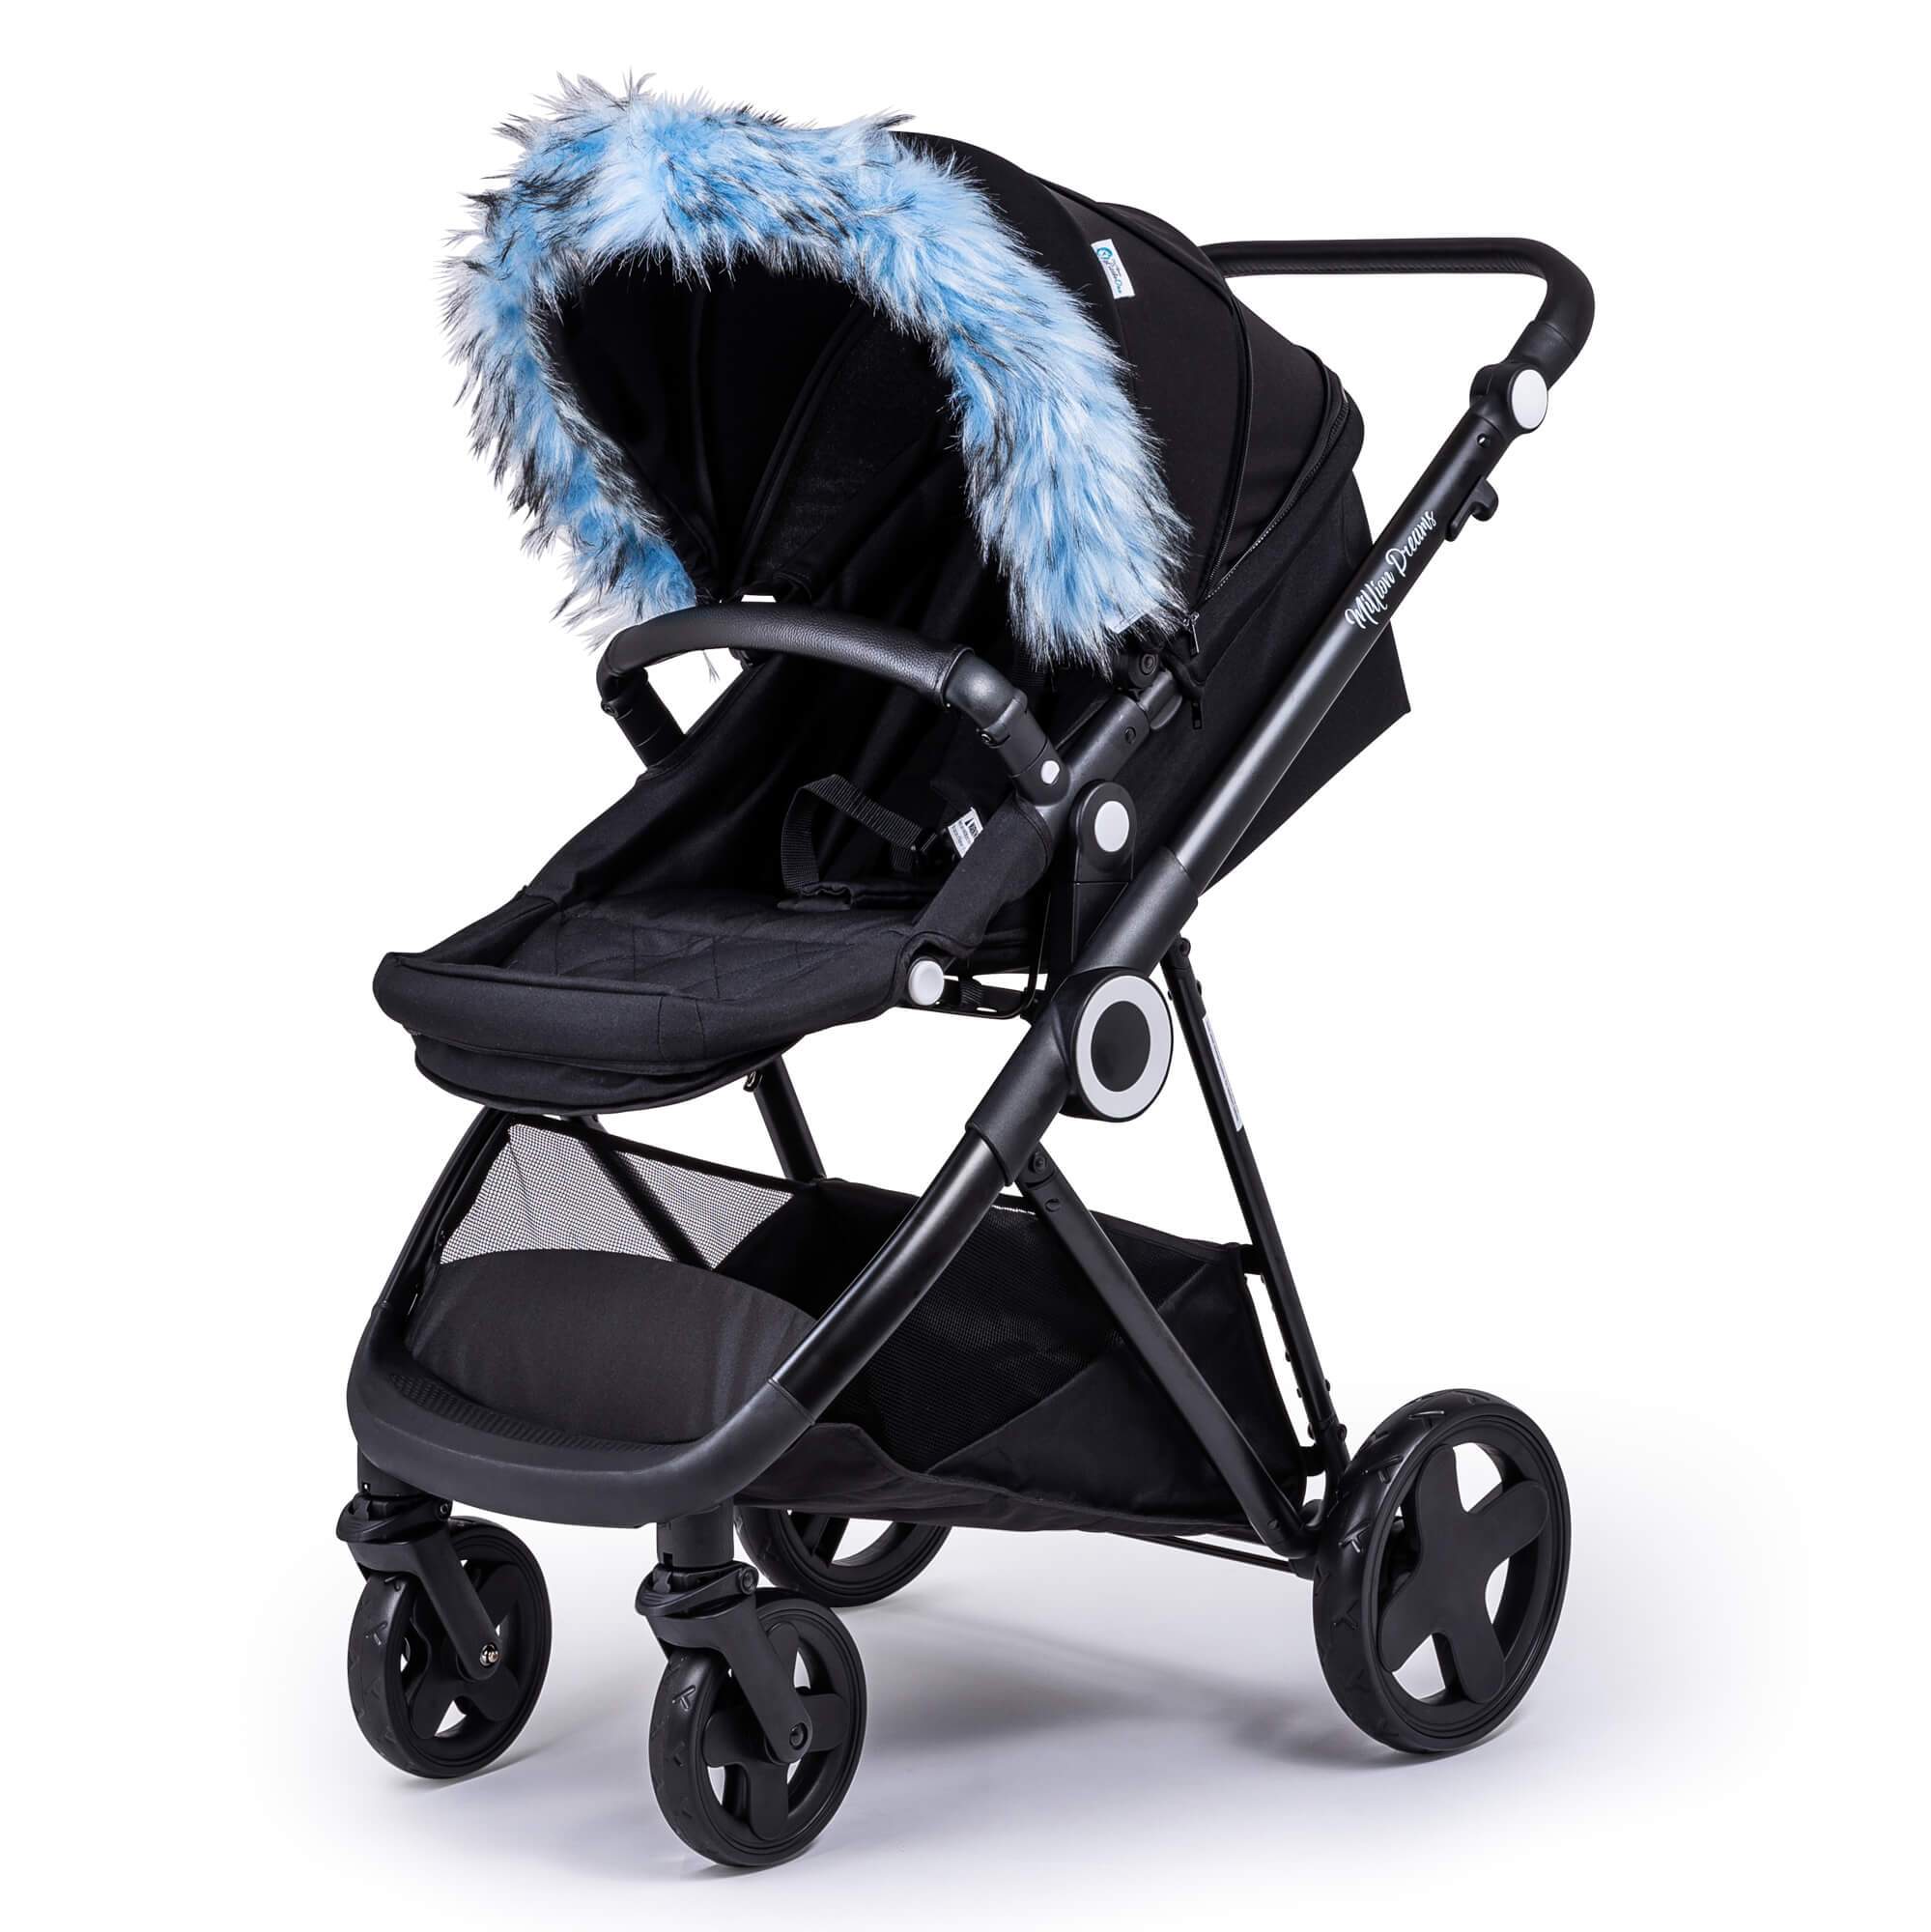 Pram Fur Hood Trim Attachment for Pushchair Compatible with Maxi Cosi - Light Blue / Fits All Models | For Your Little One